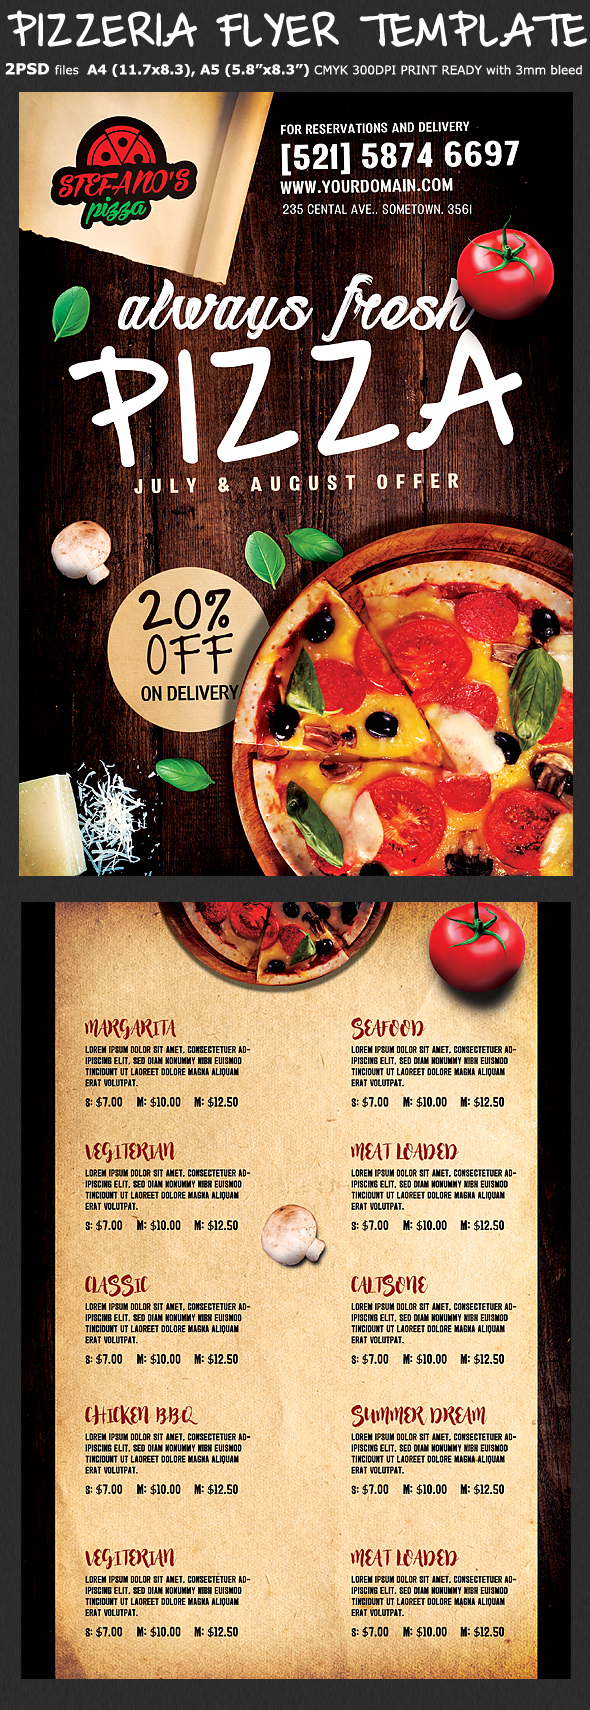 Pizza Advertising  pizza delivery menu pizza flyer pizza menu Pizza Offer restaurant menu Pizza slice